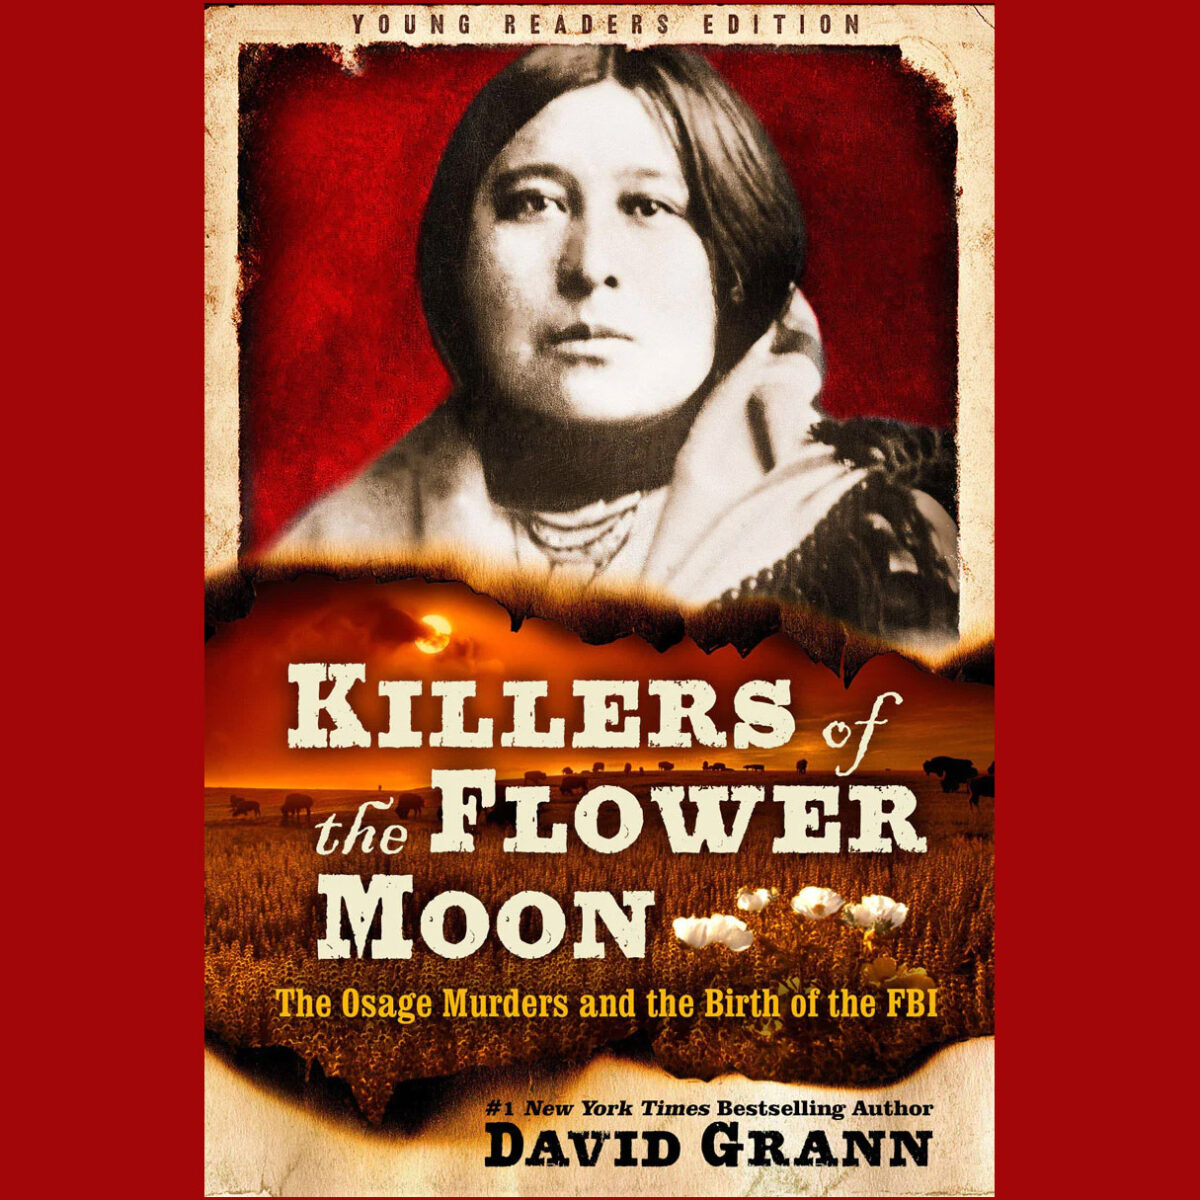 ExNotes Book Review:  Killers of the Flower Moon